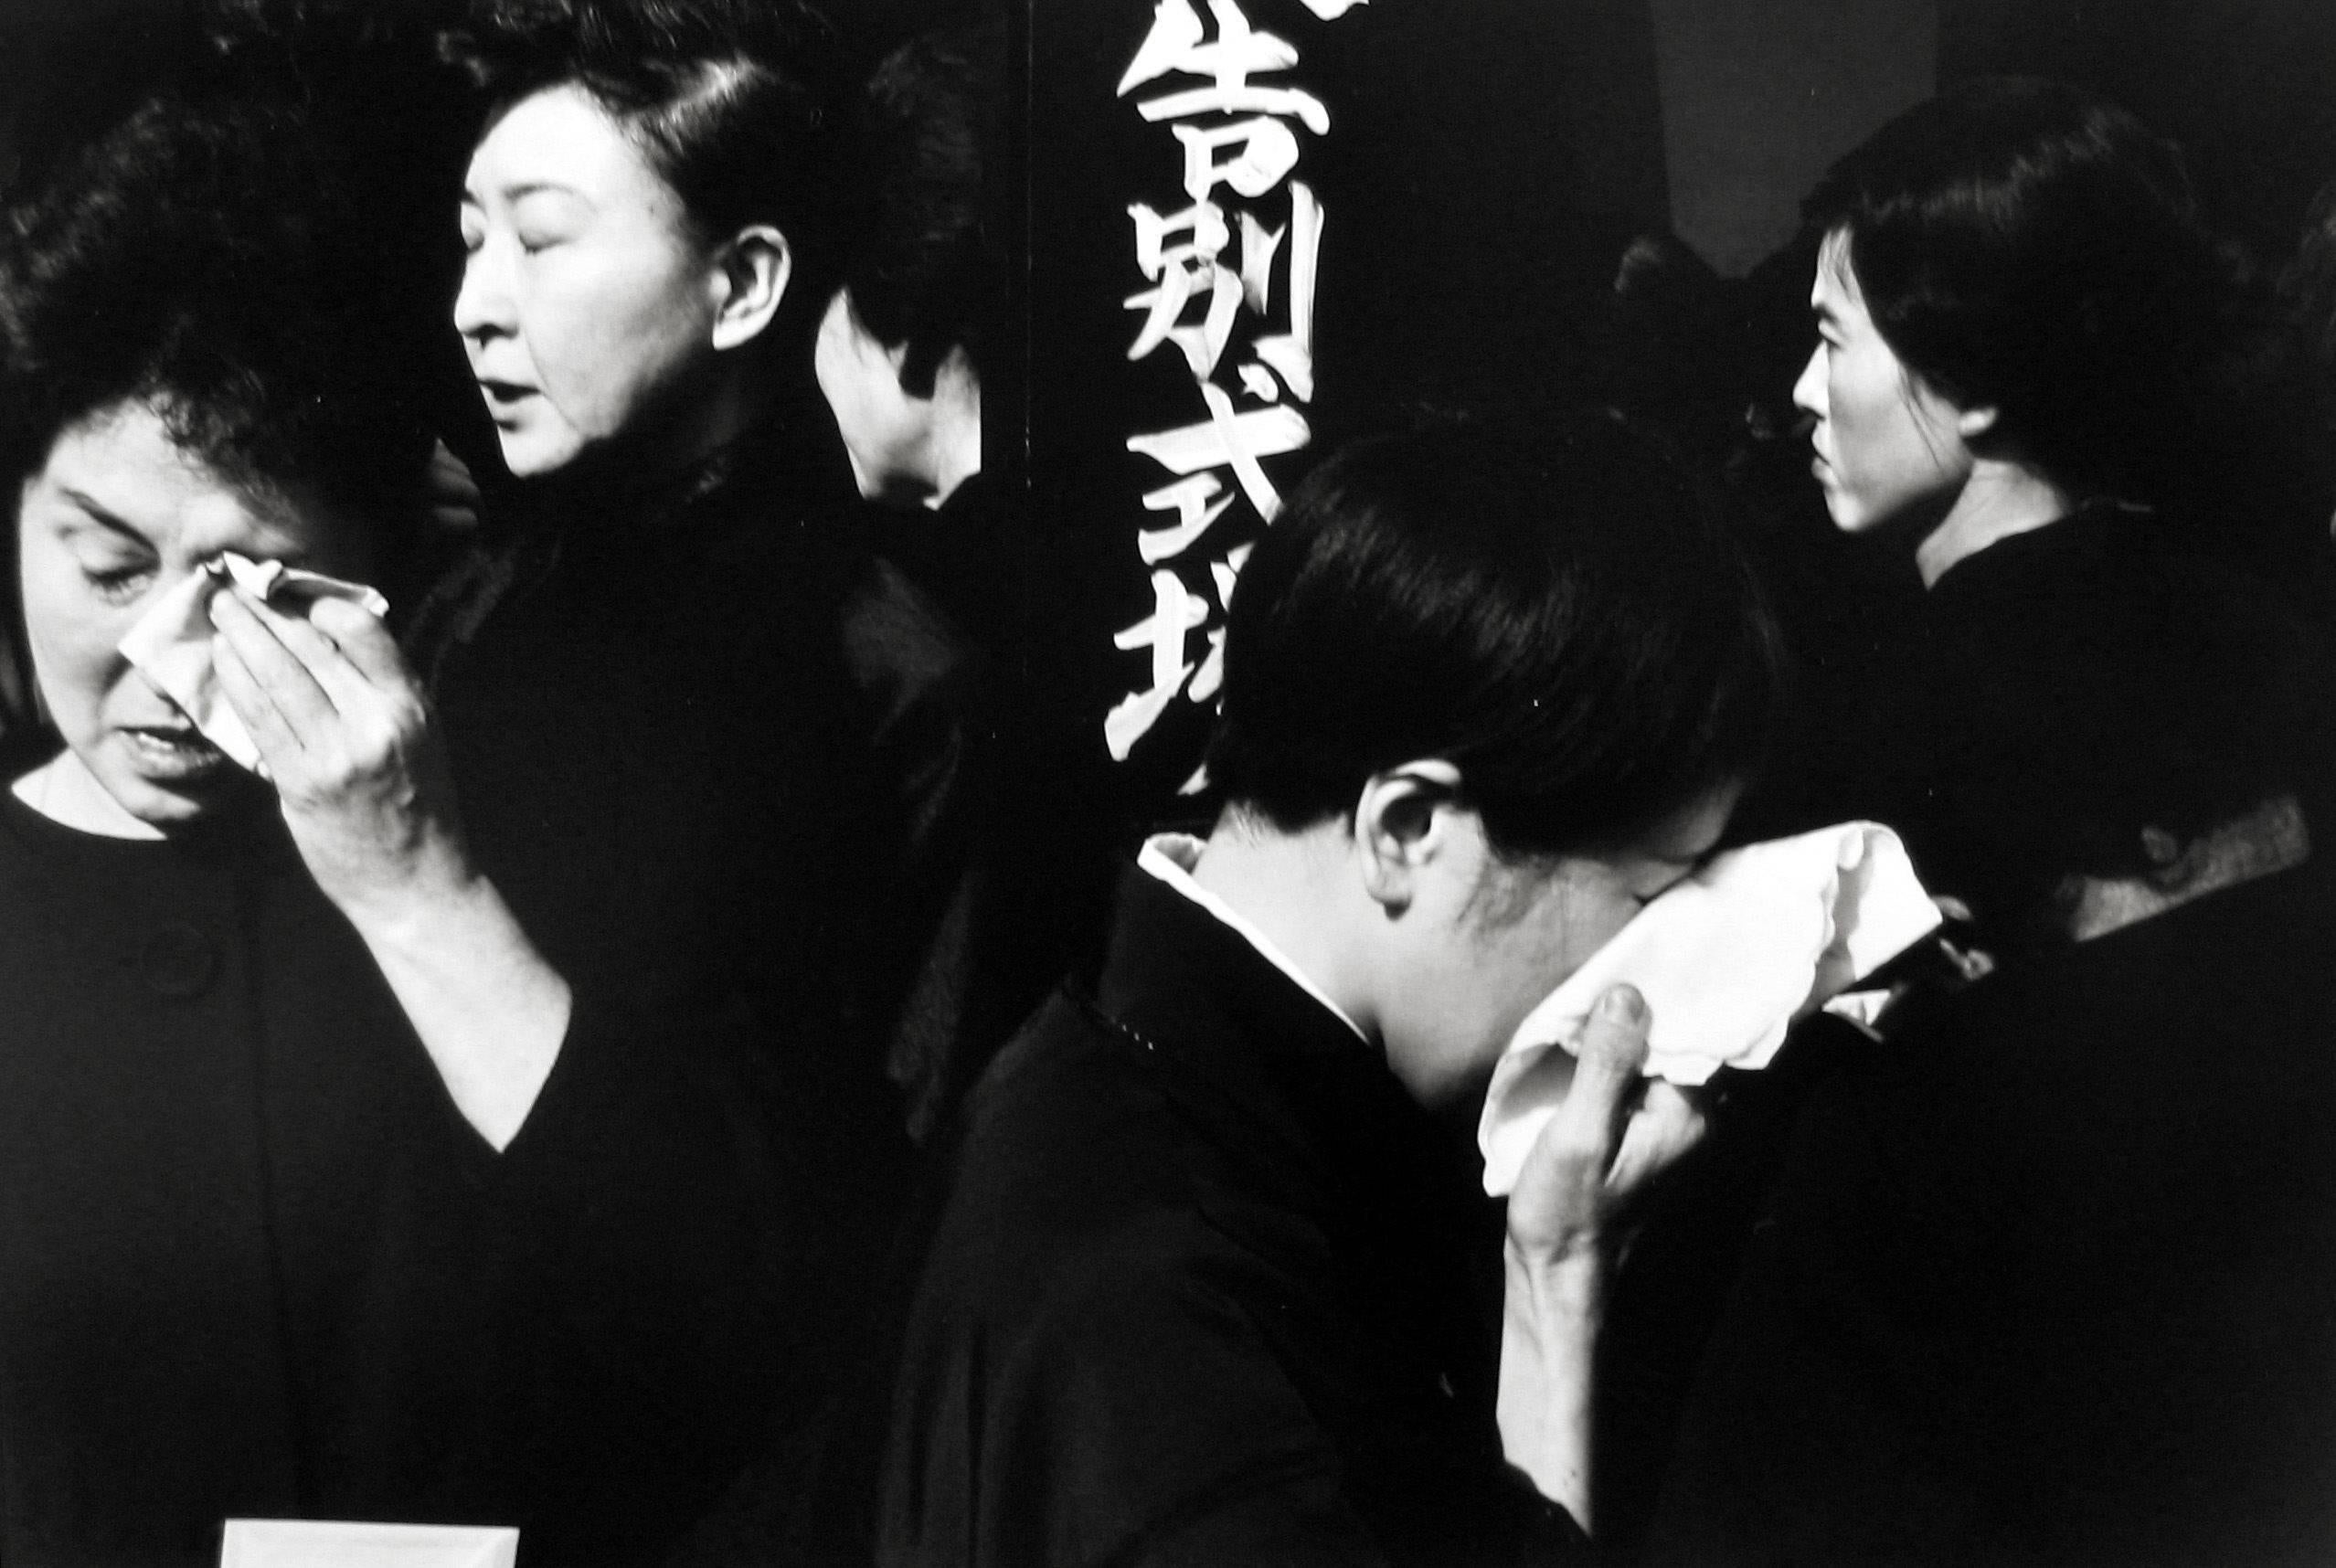 Henri Cartier-Bresson Black and White Photograph - Funeral of a Kabuki Actor, Japan